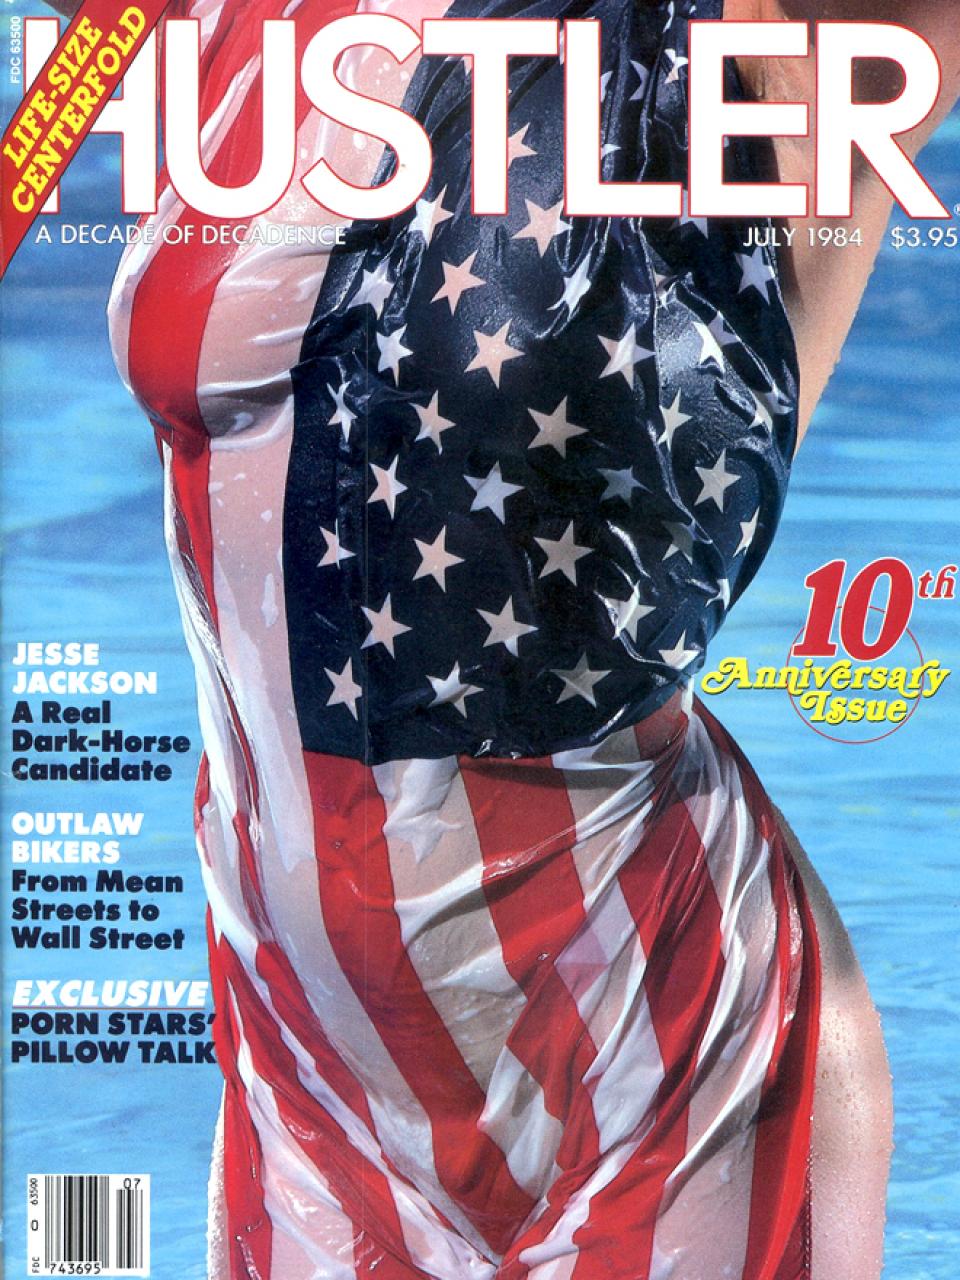 Browse HUSTLER Magazine's July 1984 Issue Featuring July's HUSTLE...